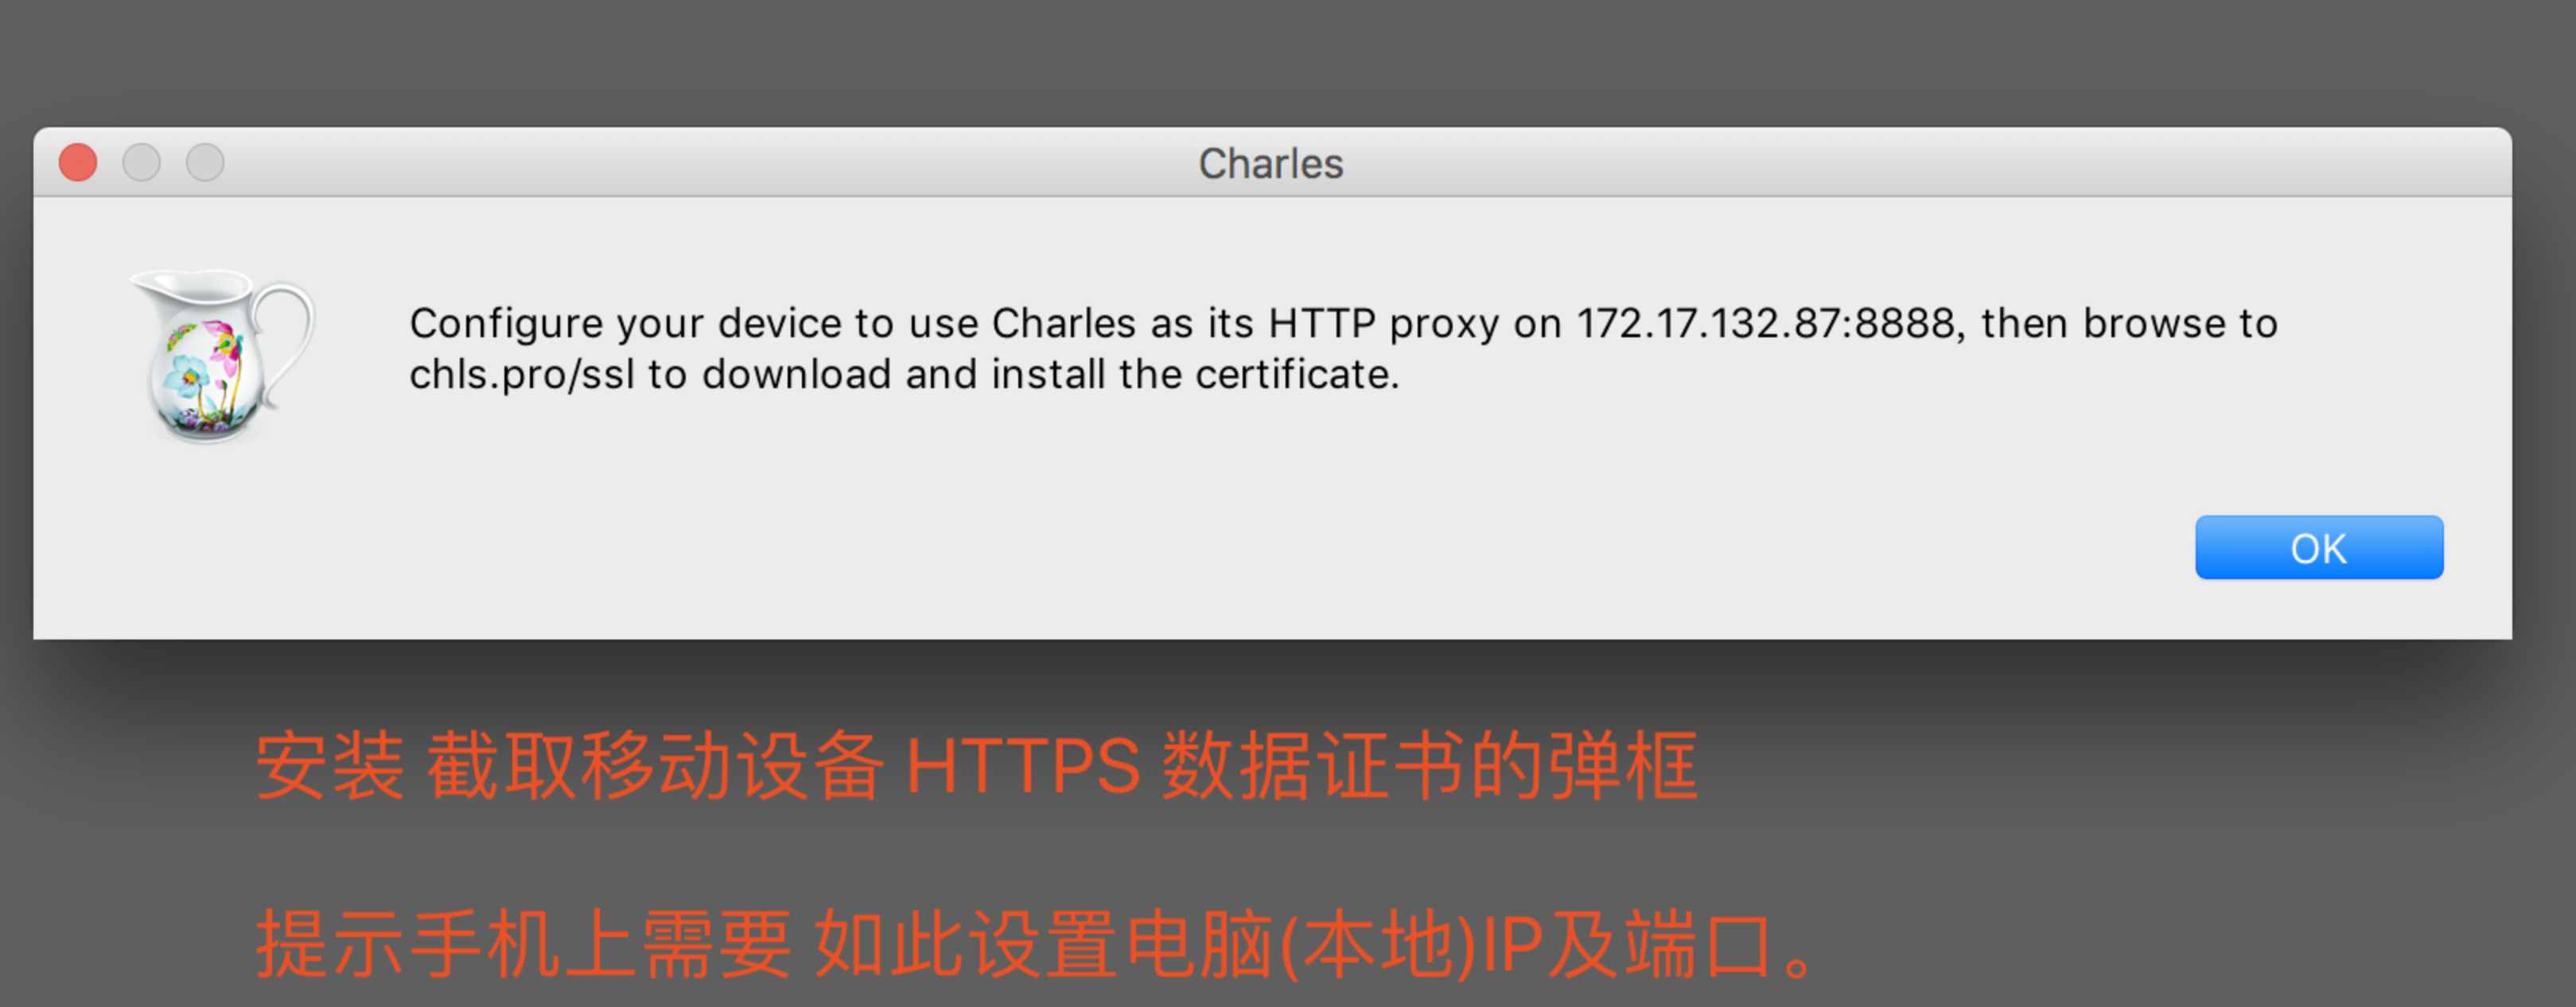 Charles-Mobile-Proxy-Tips